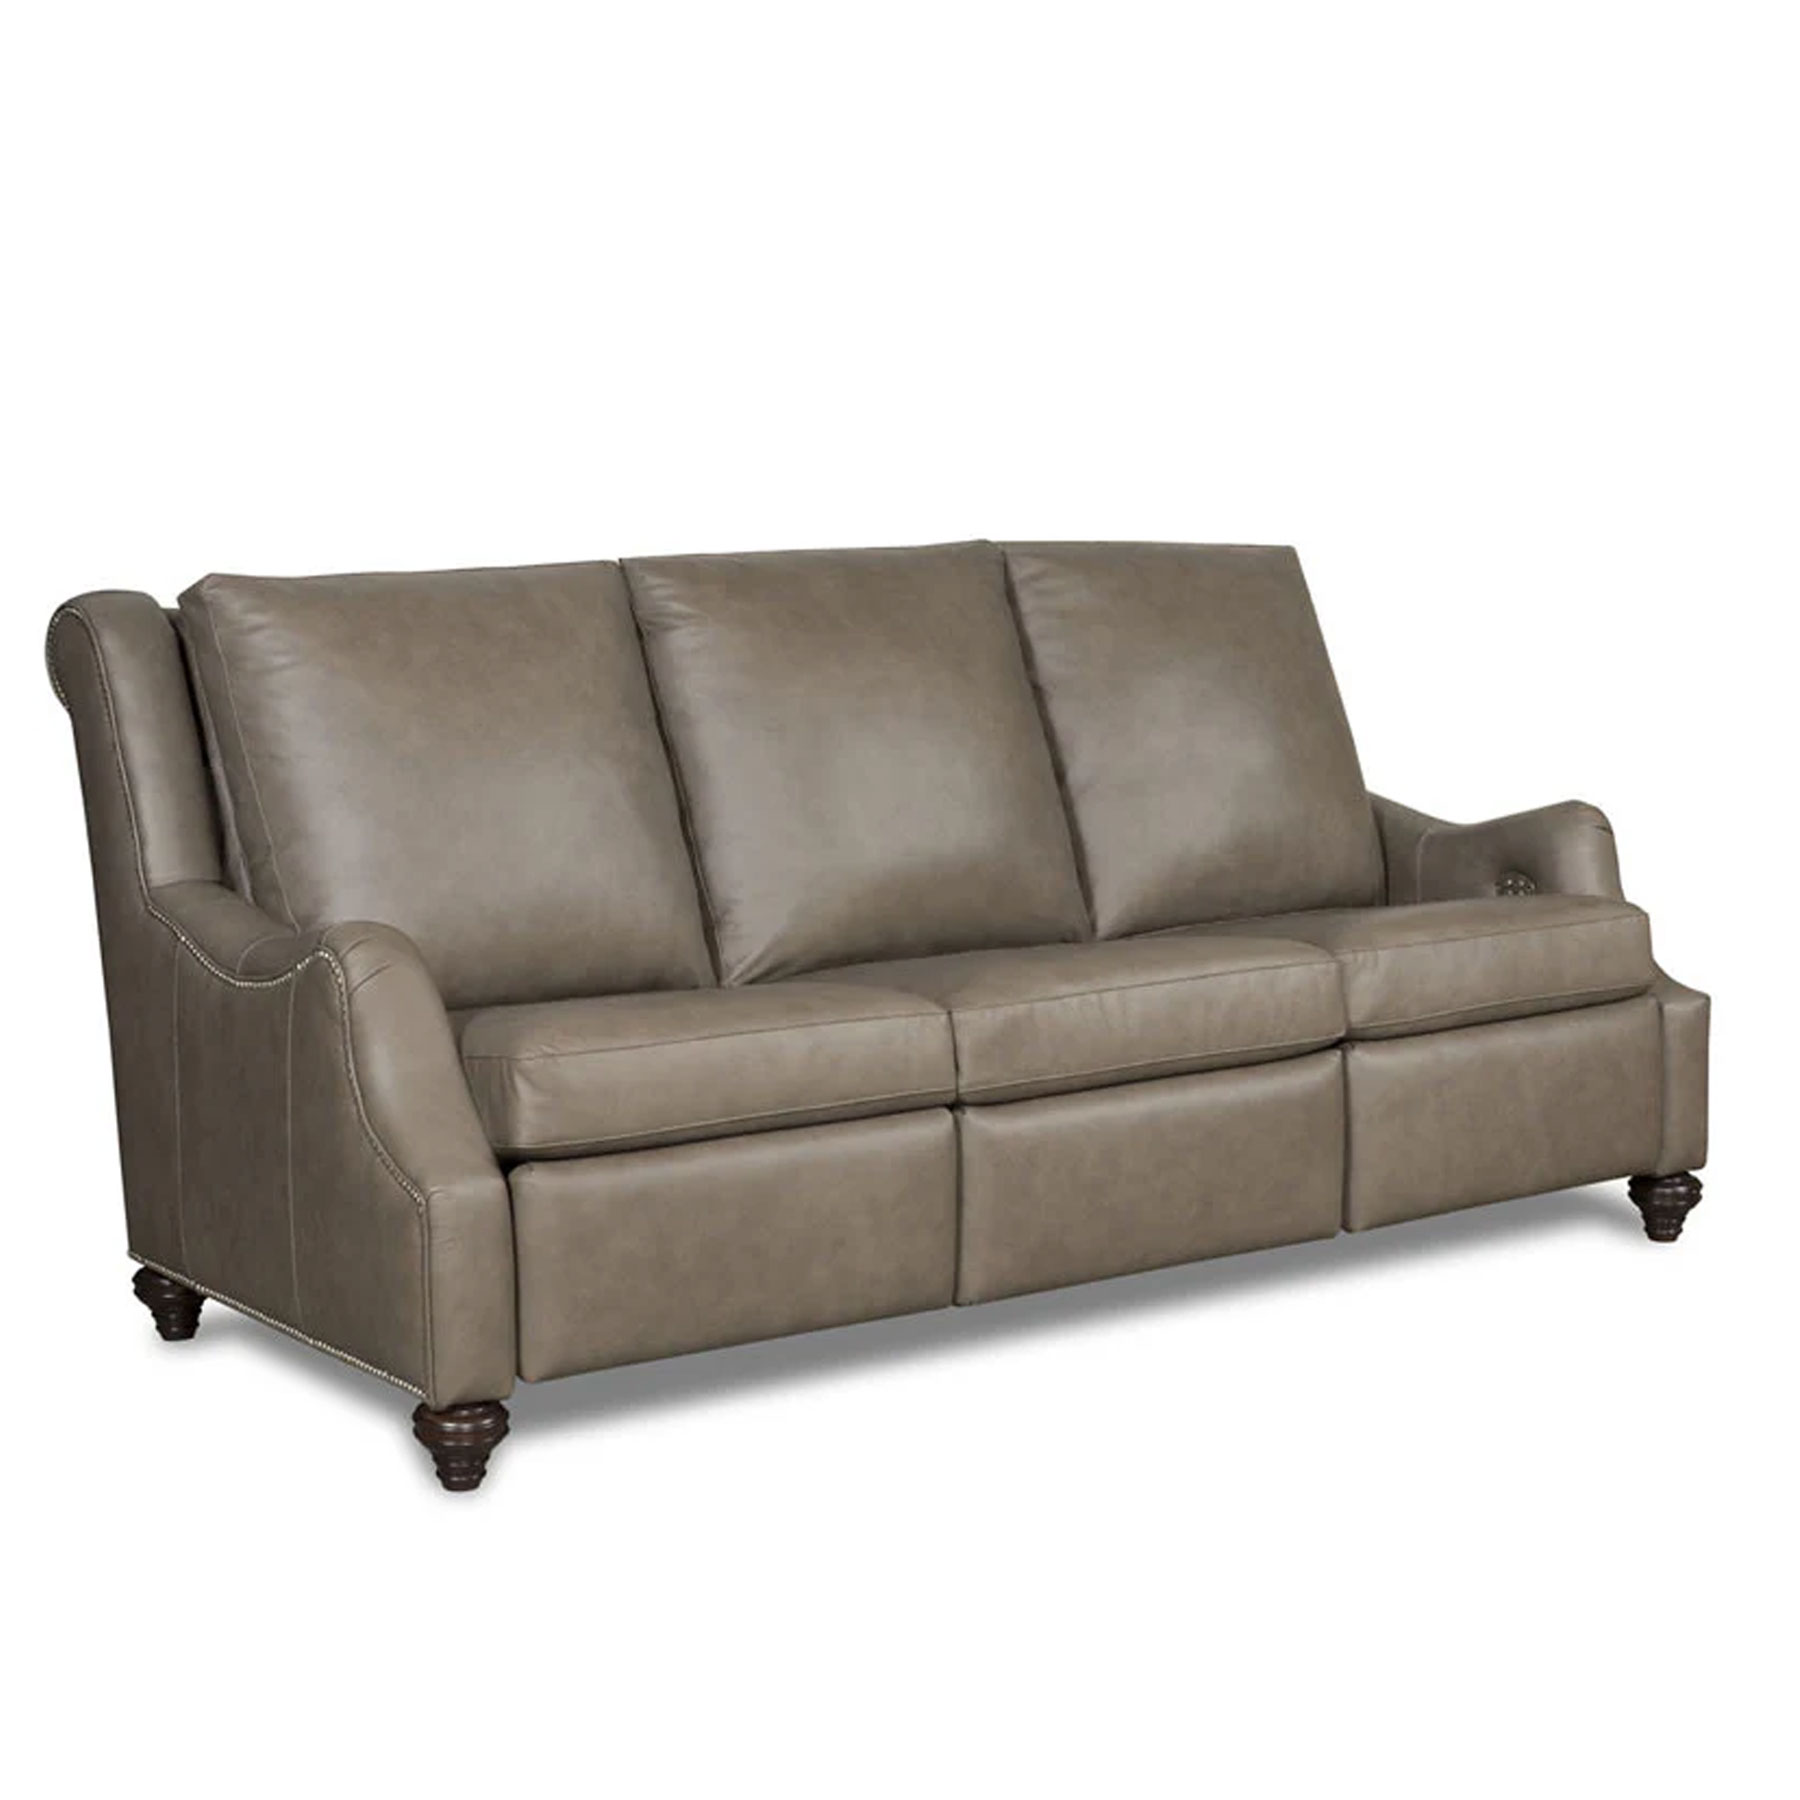 McKinley Leather 7104 Maxwell Reclining Sofa with Power in Paragon Barrel Leather